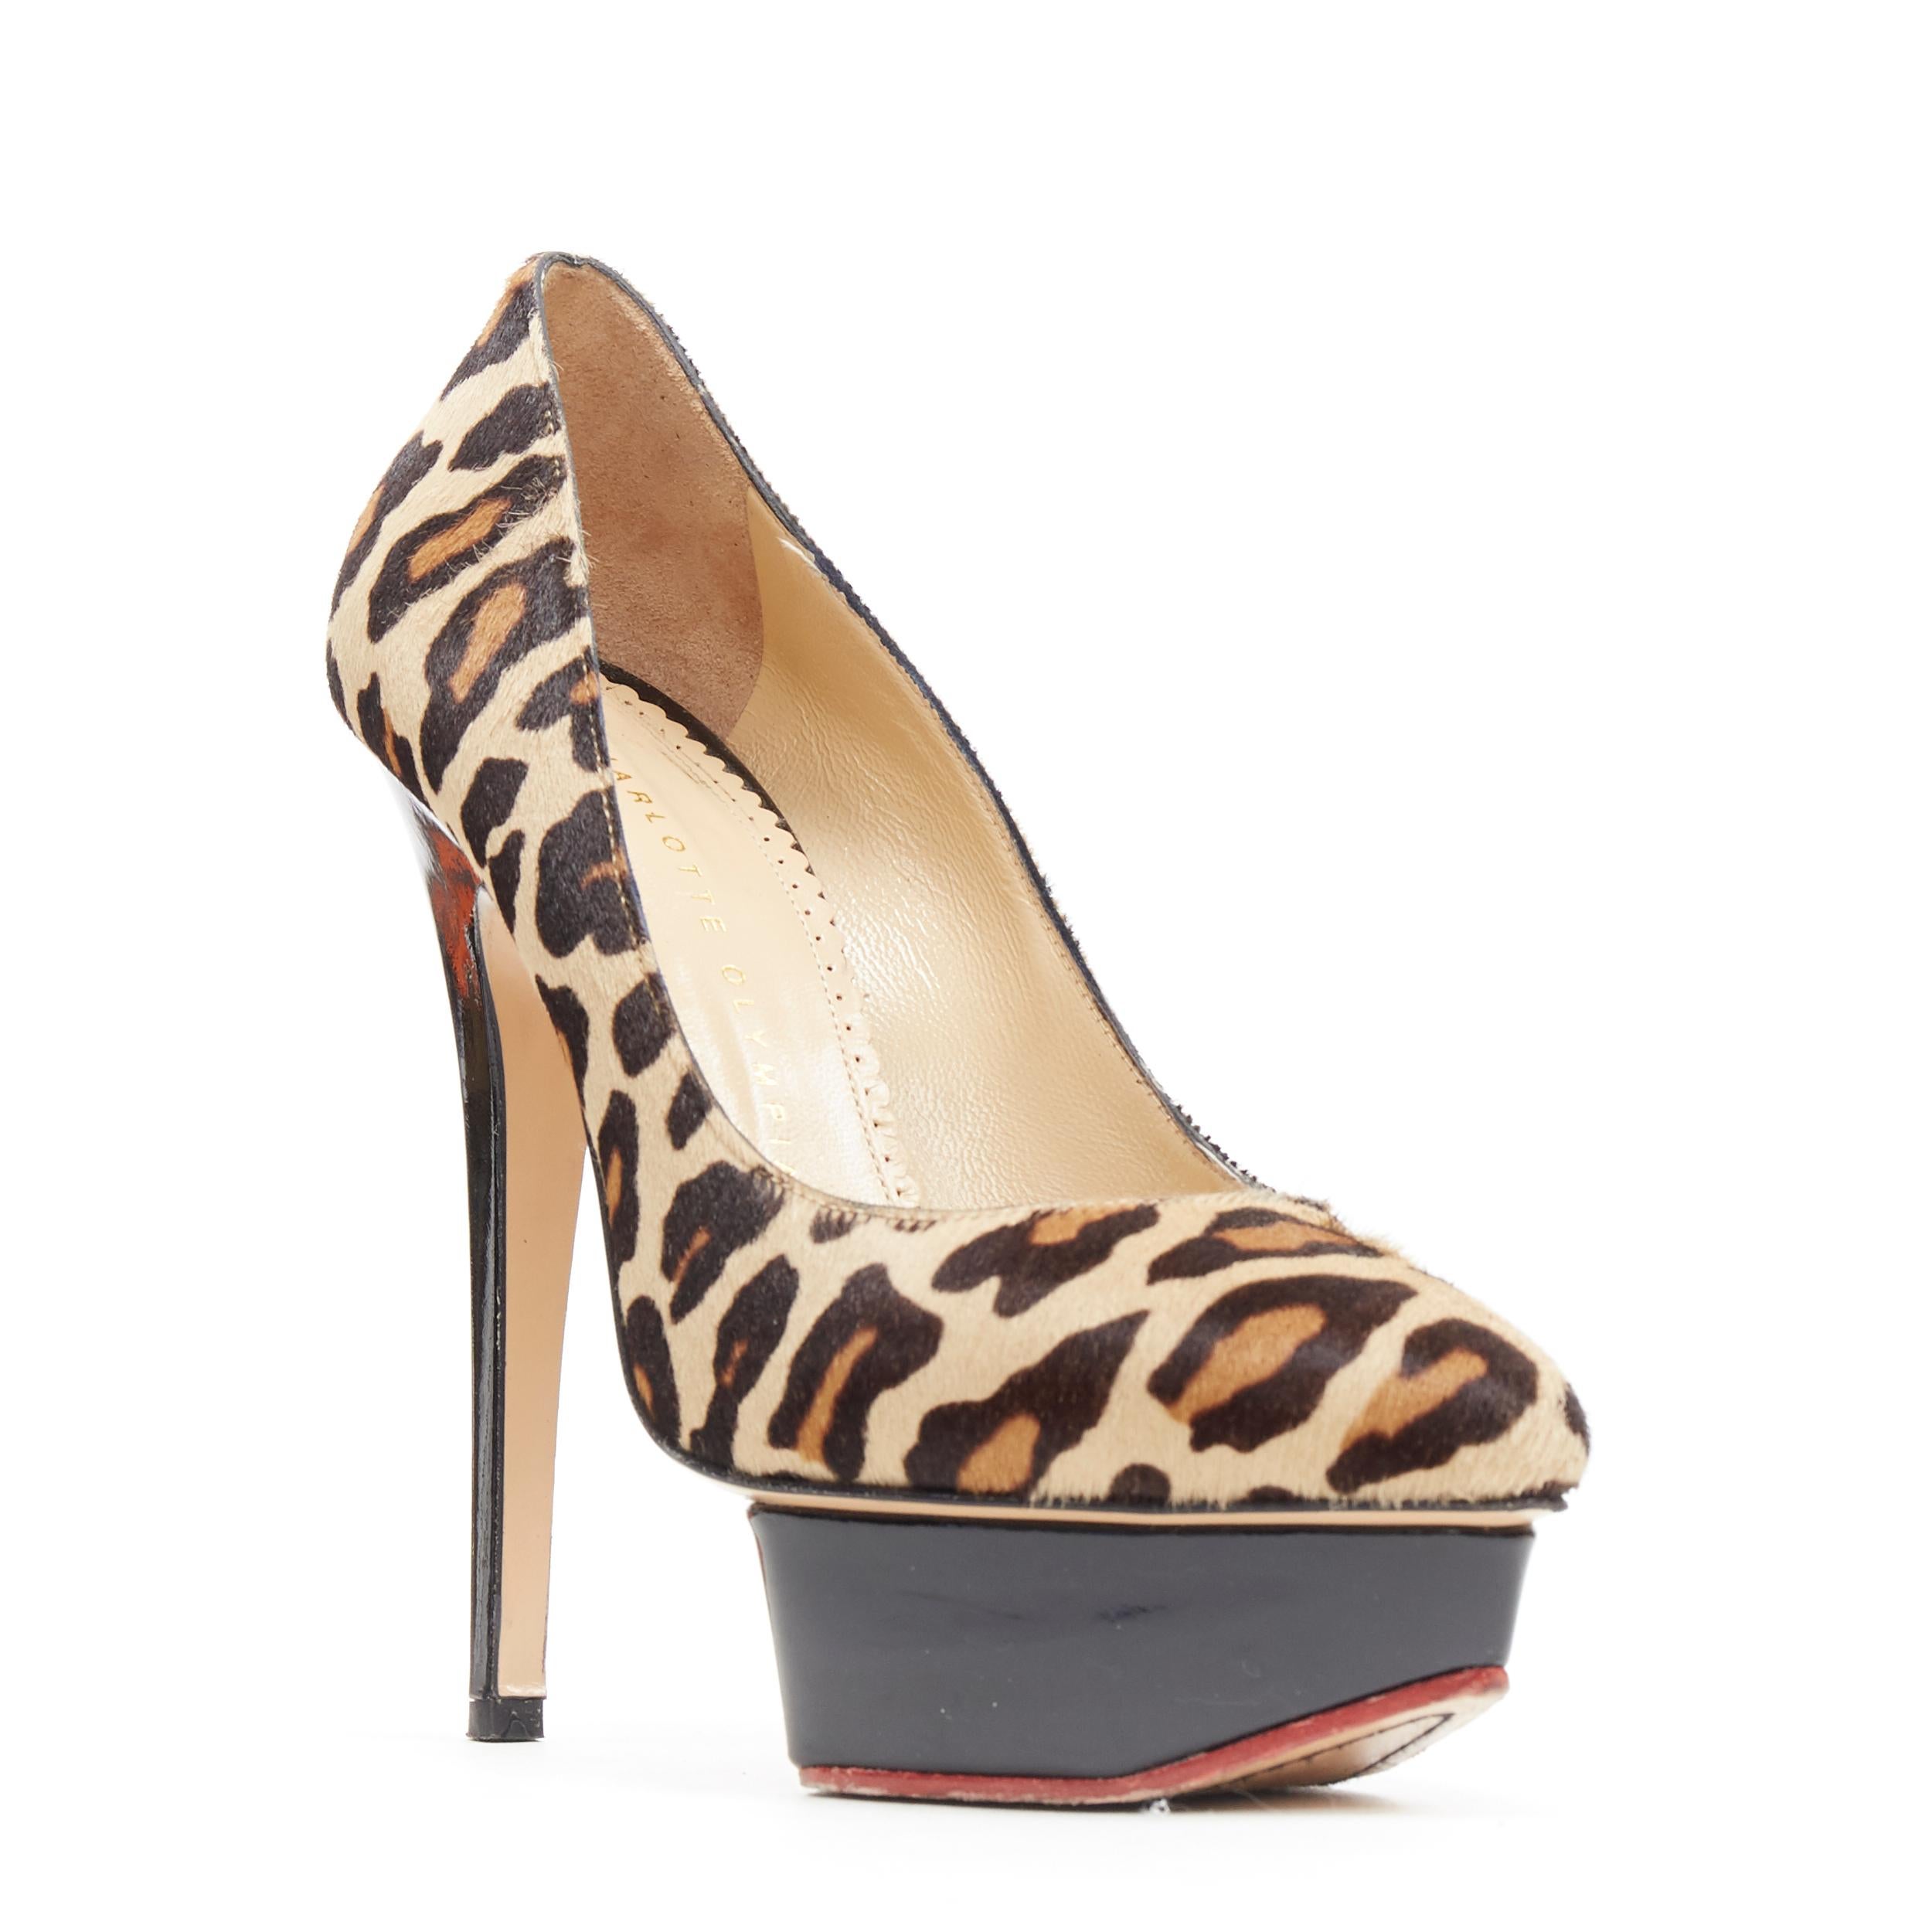 CHARLOTTE OLYMPIA Dolly brown leopard pony hair patent platform pump EU36.5
Brand: Charlotte Olympia
Designer: Charlotte Olympia
Model Name / Style: Dolly
Material: Leather
Color: Brown
Pattern: Animal Print
Extra Detail: Ultra High (4 in & Higher)